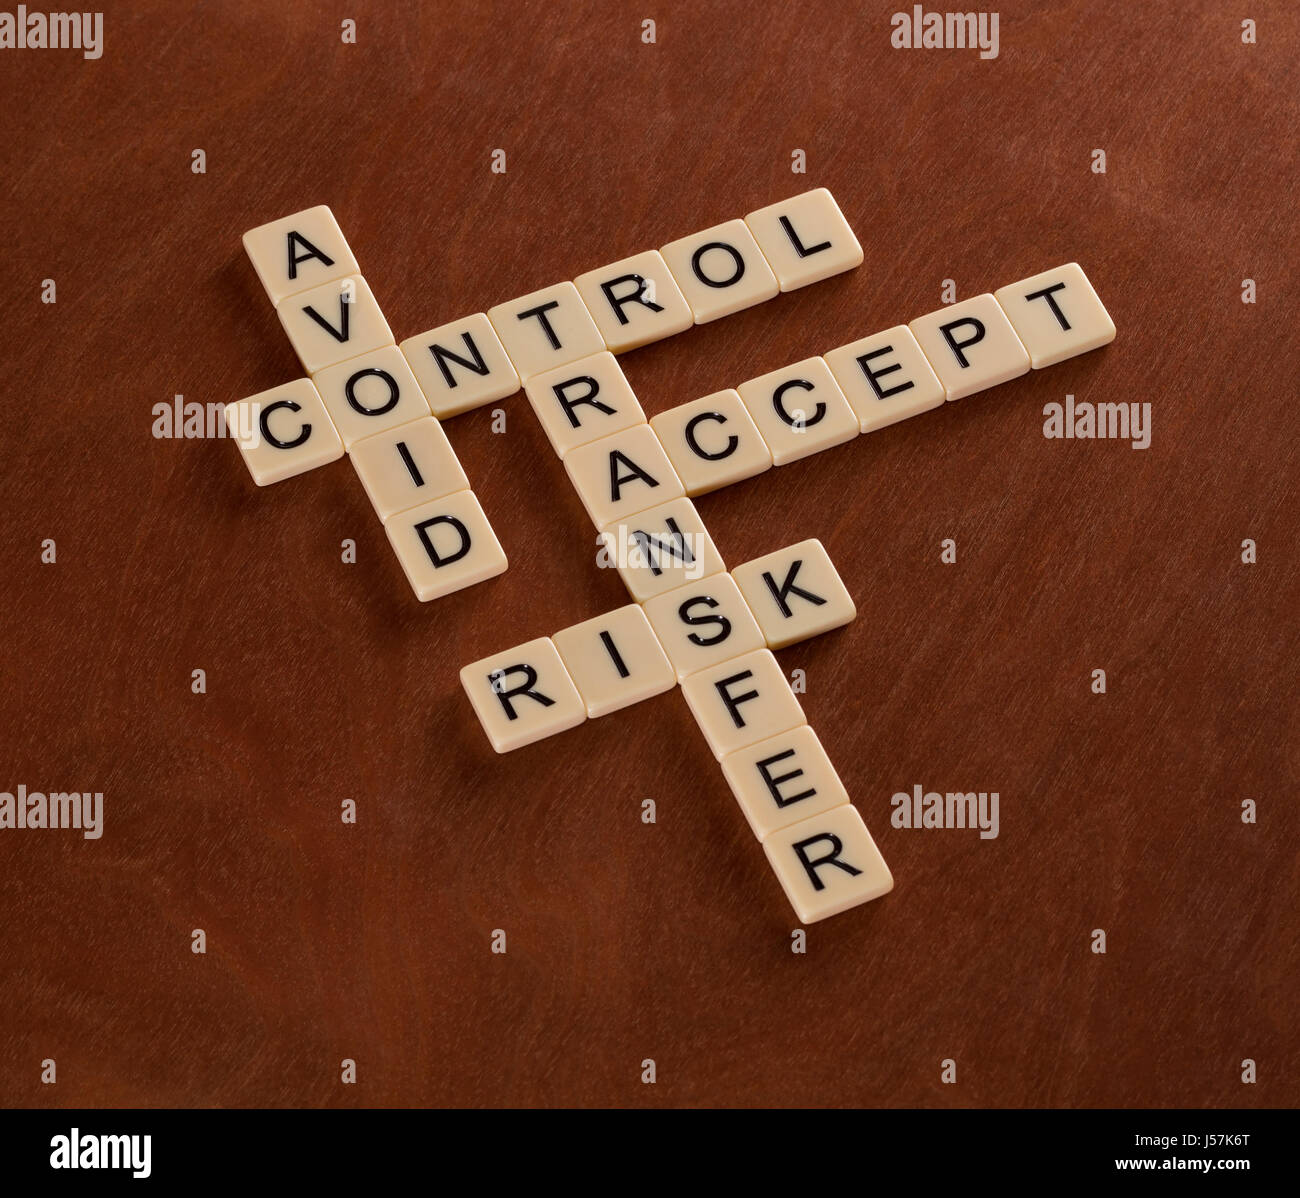 Crossword puzzle with words Avoid, Control, Transfer, Accept. Risk Management concept. Ivory tiles with capital letters on mahogany board. Stock Photo